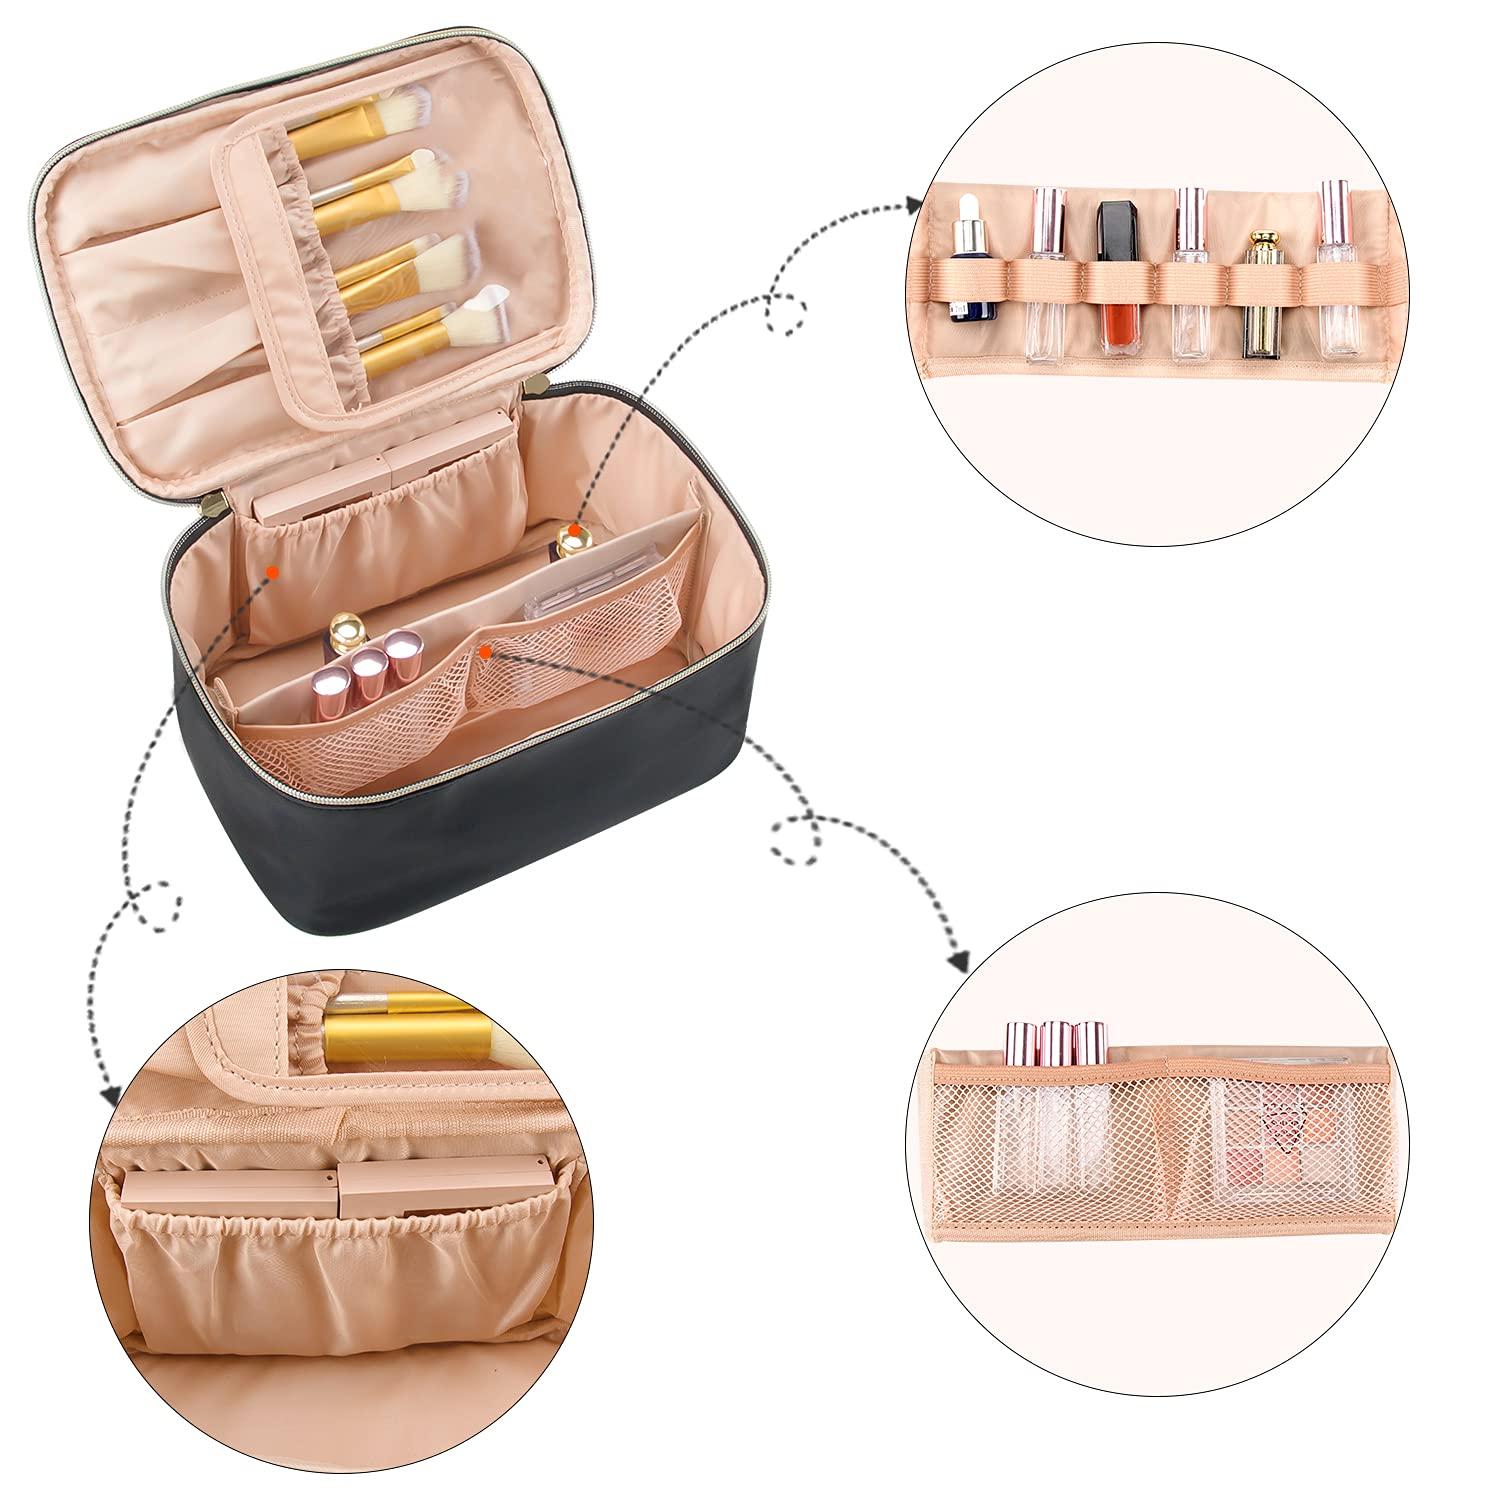 OCHEAL Clear Makeup Bag, TSA Approved Toiletry Bag Small Portable Travel  Transparent Cosmetic Bag Organizer Cute Storage Bags with zipper for Women